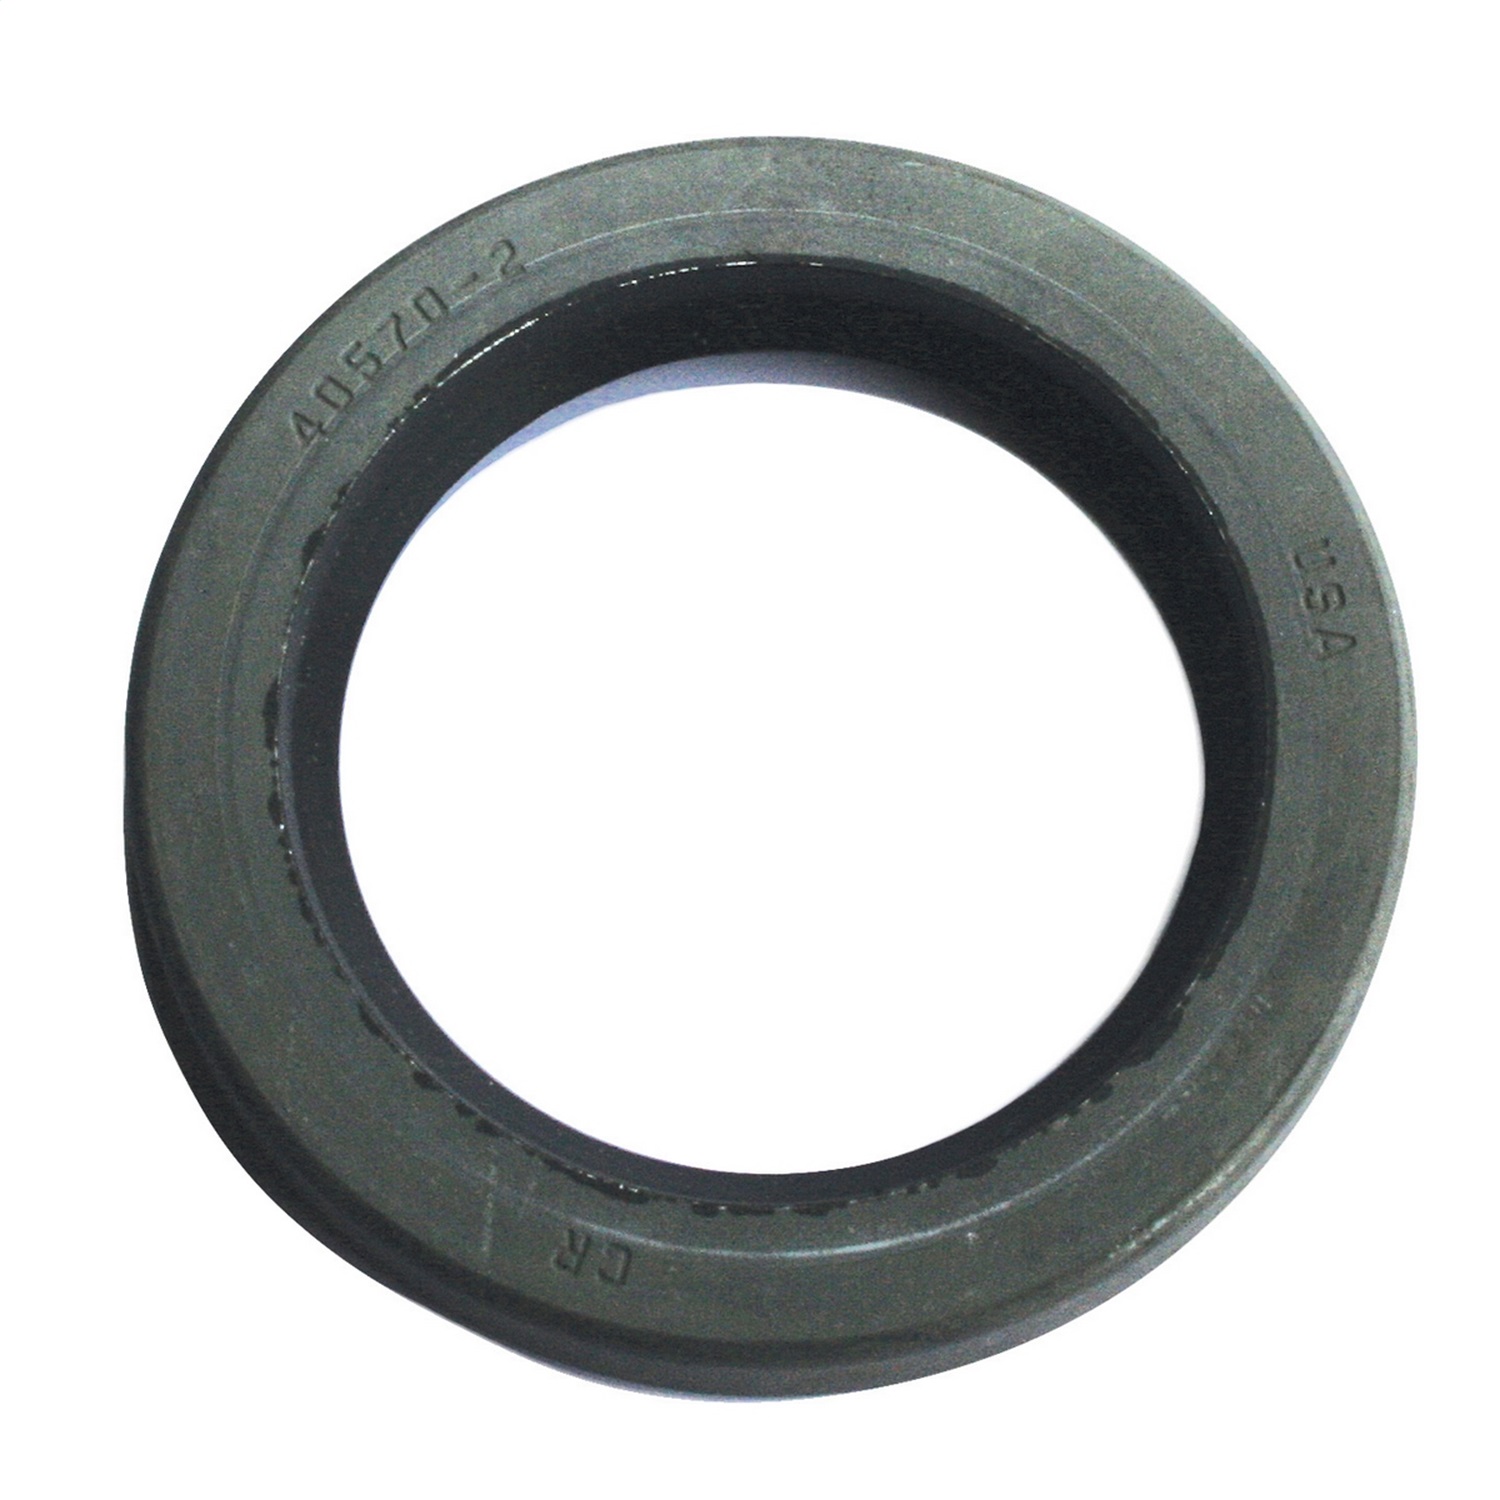 Omix 16526.06 Axle Oil Seal Fits 87-95 Wrangler (YJ)